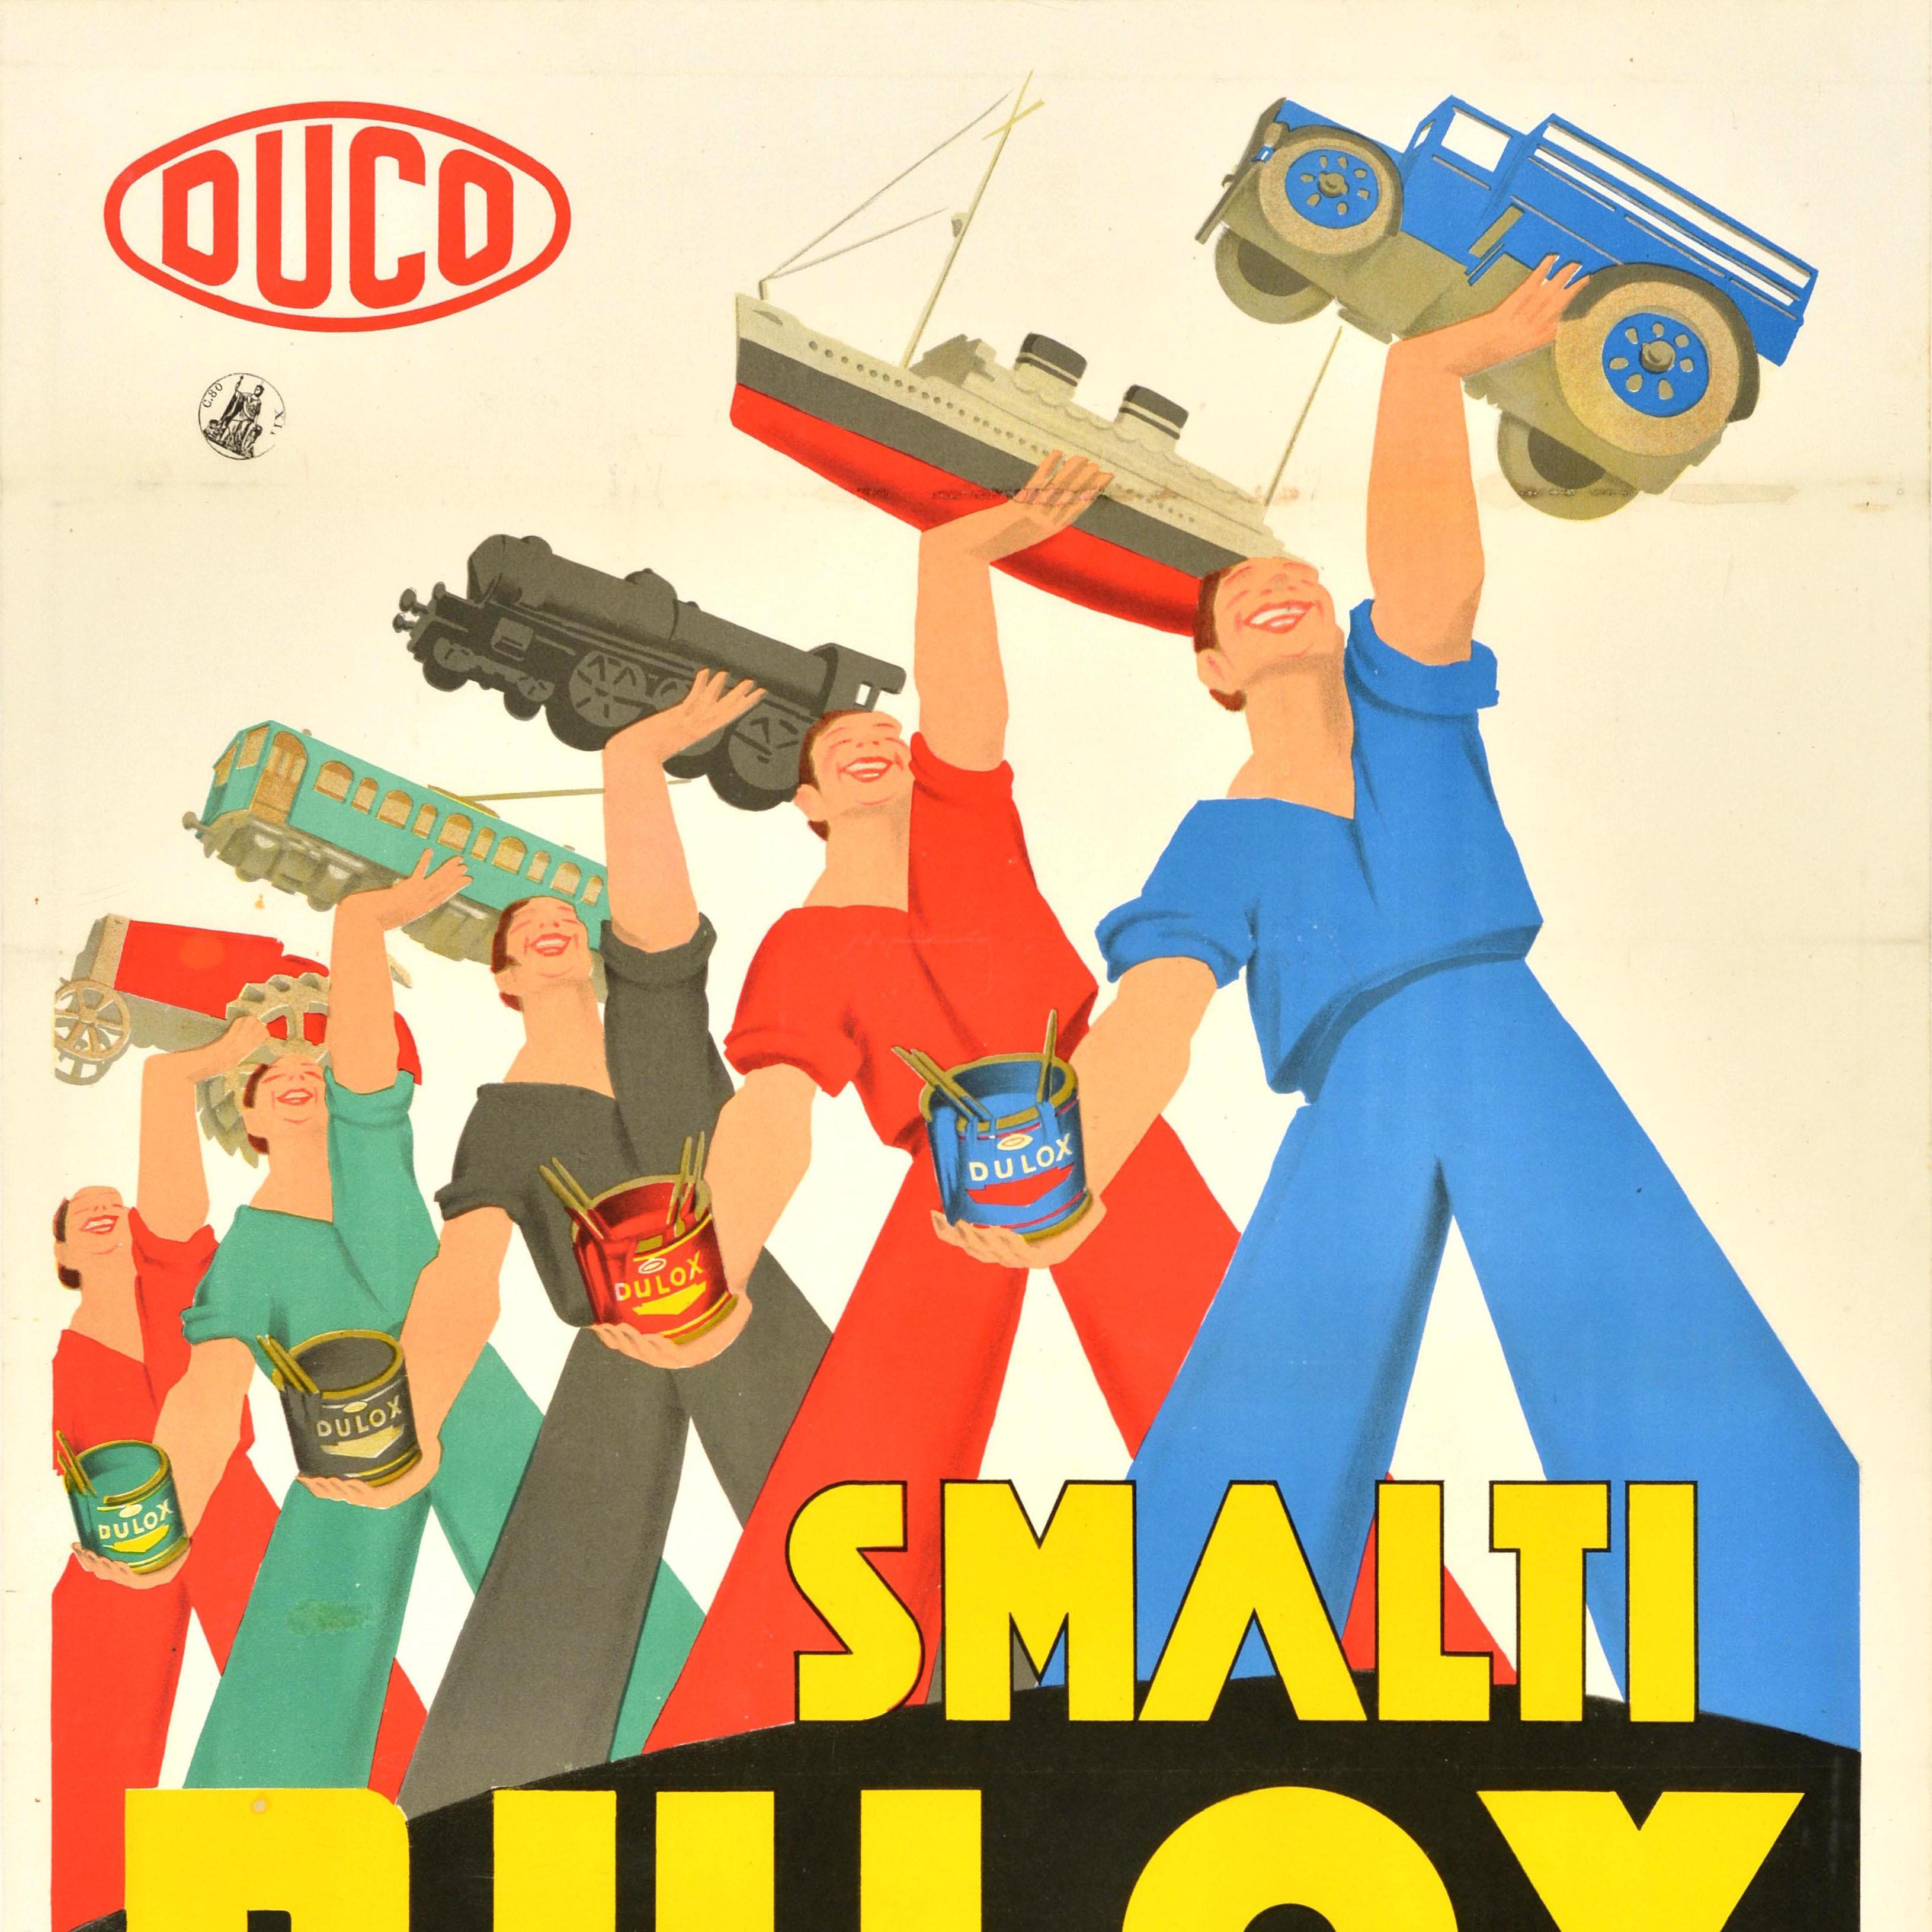 Original vintage advertising poster for Duco Dulox enamel paints - Prodotti insuperabili totalmente Italiani / Unsurpassed, totally Italian products - featuring a great illustration of smiling workers in blue, red, grey and green overalls in a line